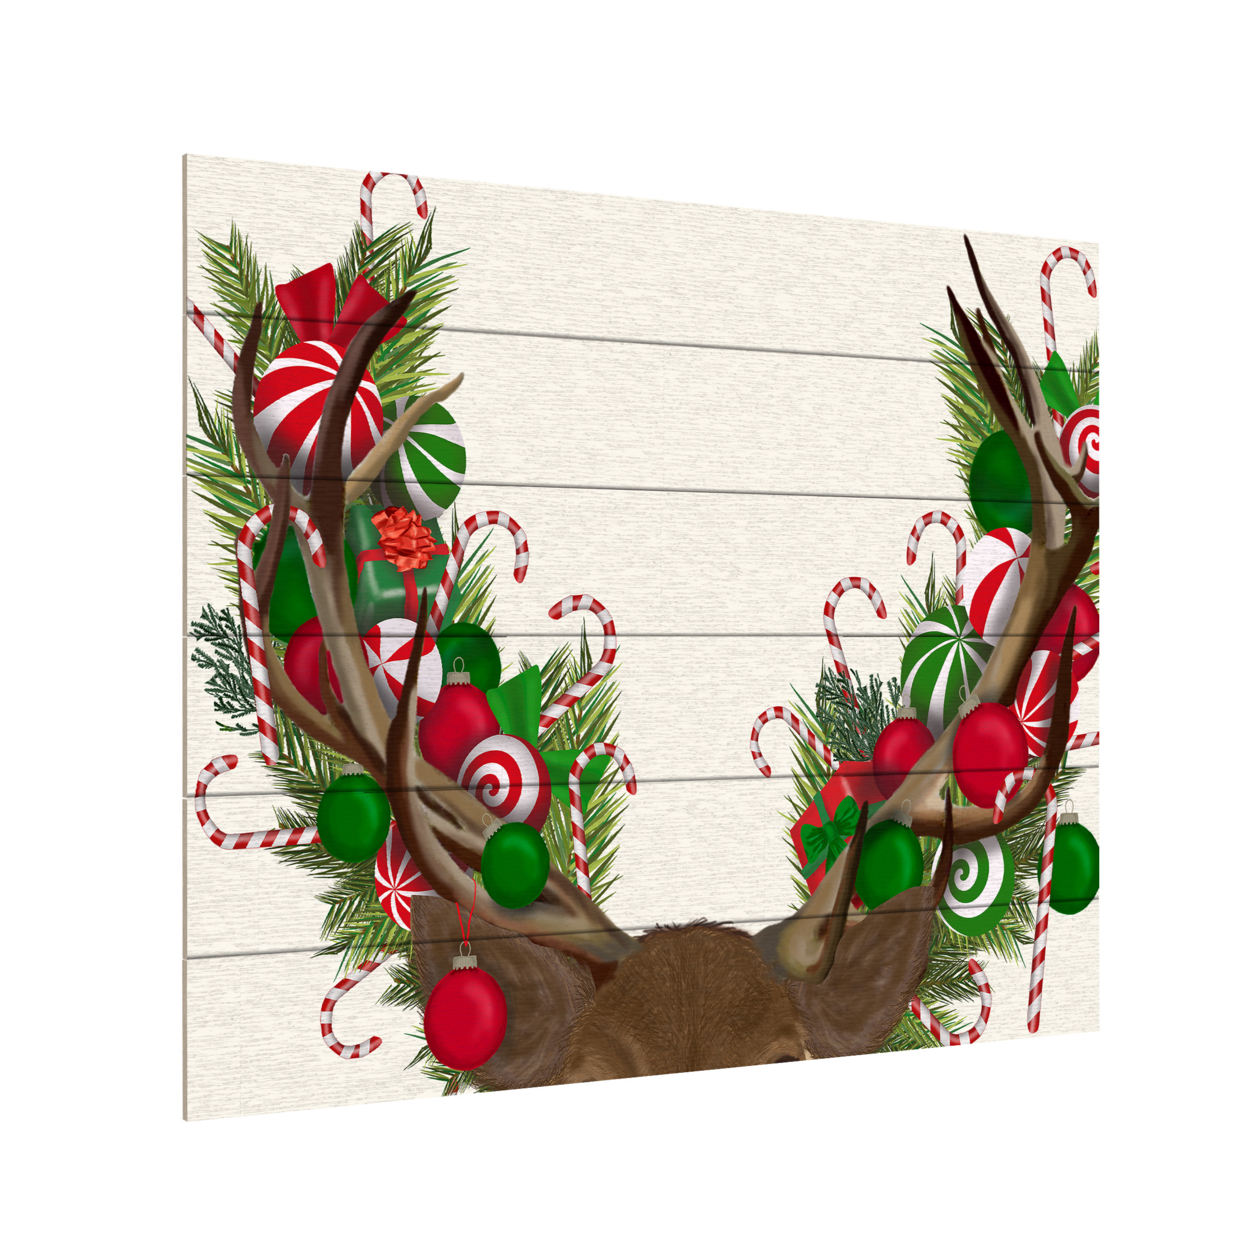 Wooden Slat Art 18 X 22 Inches Titled Deer, Candy Cane Wreath Ready To Hang Home Decor Picture